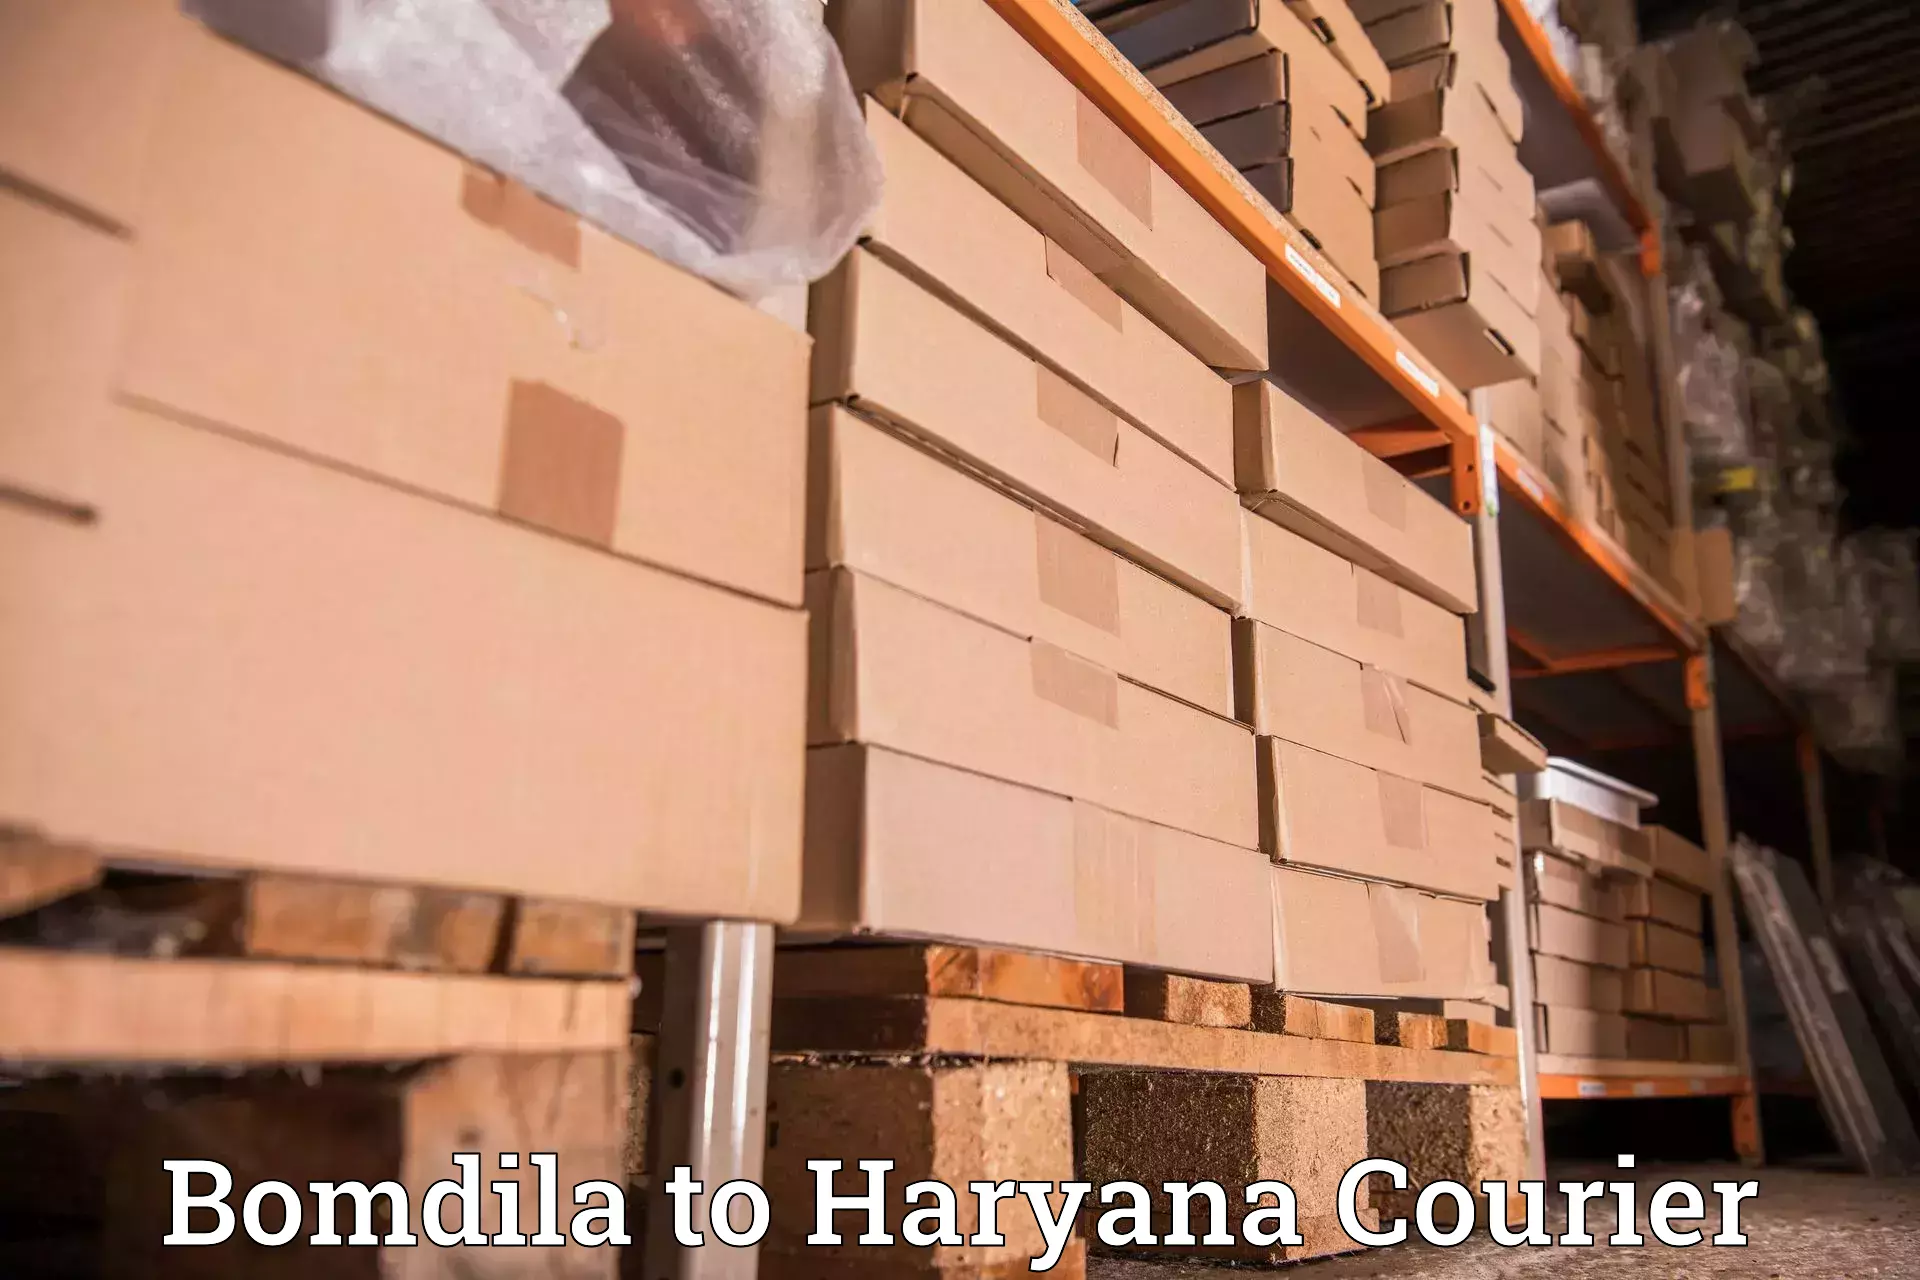 Personal parcel delivery in Bomdila to Gohana